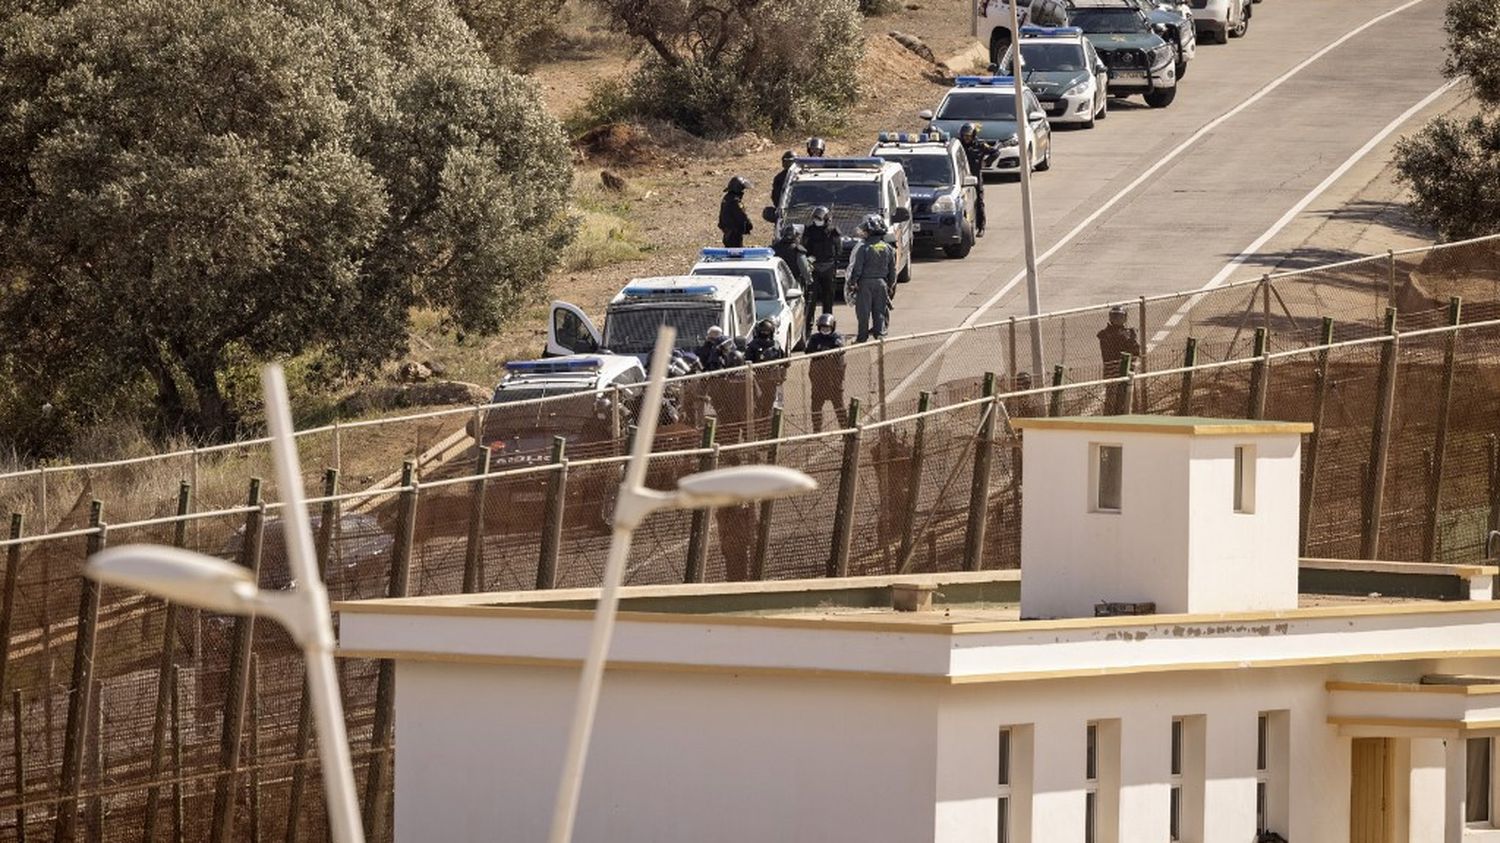 Nearly 2,000 migrants try to enter the Spanish enclave of Melilla
